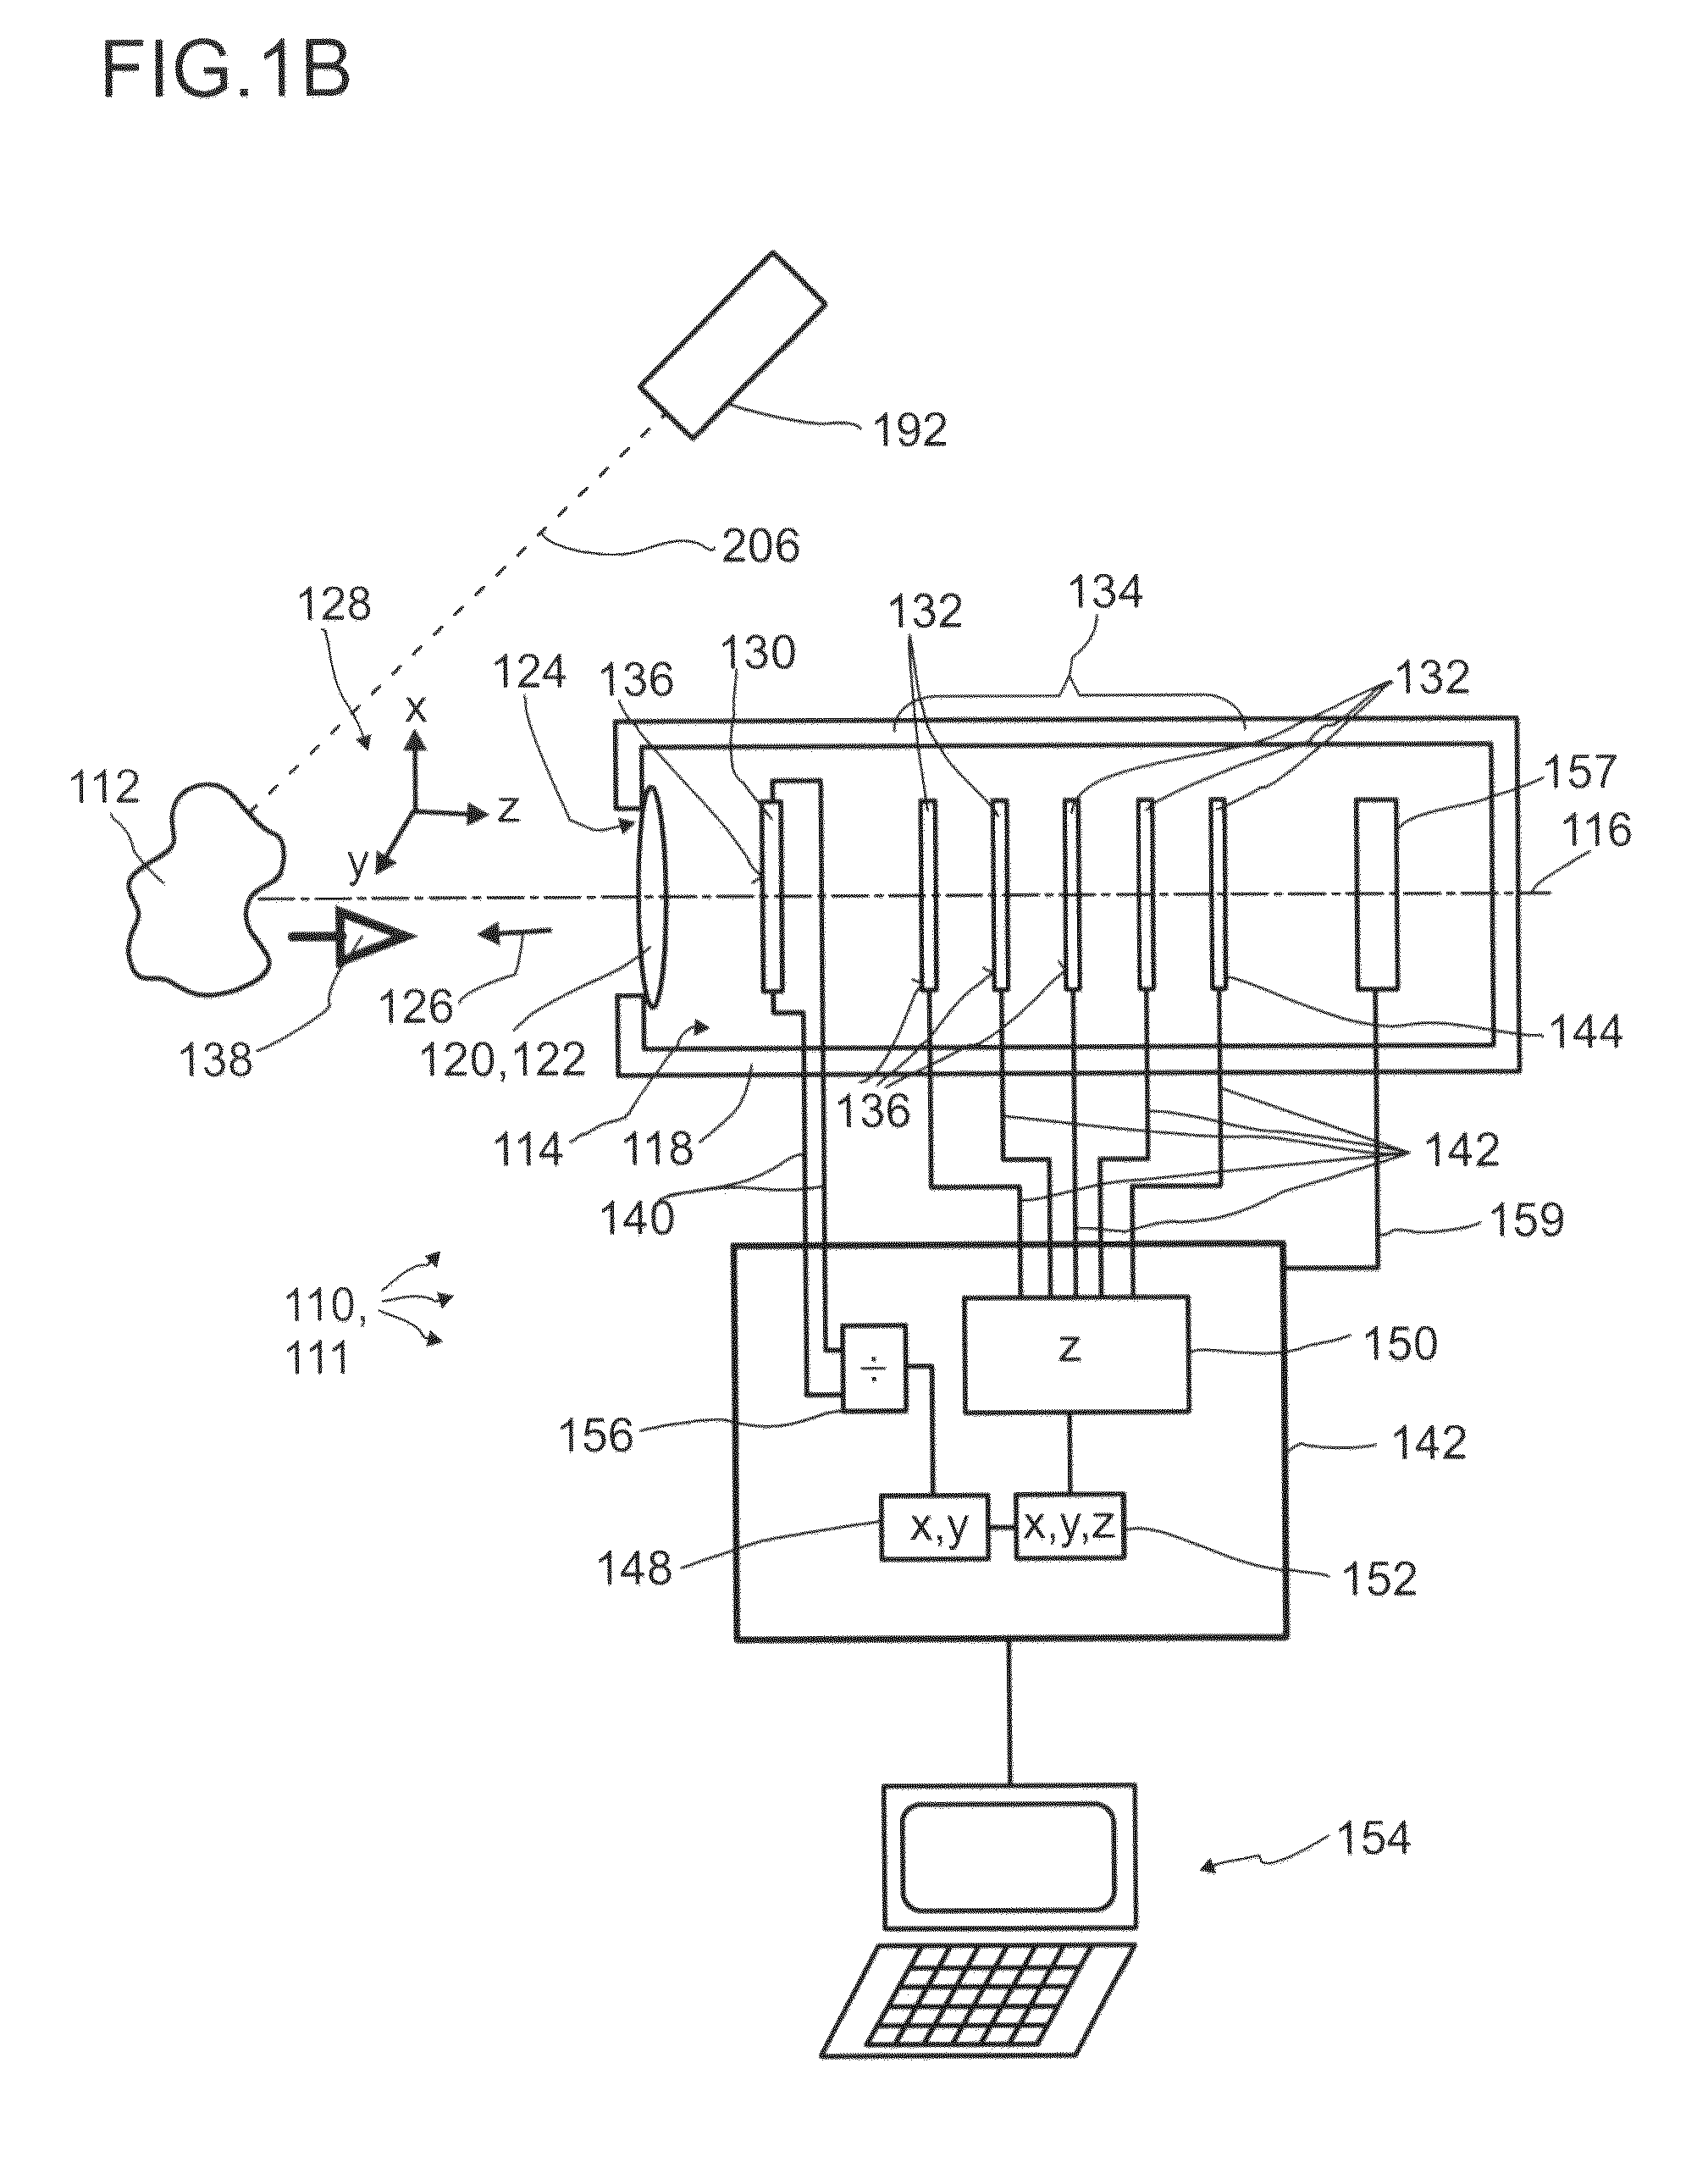 Detector comprising a transversal optical sensor for detecting a transversal position of a light beam from an object and a longitudinal optical sensor sensing a beam cross-section of the light beam in a sensor region